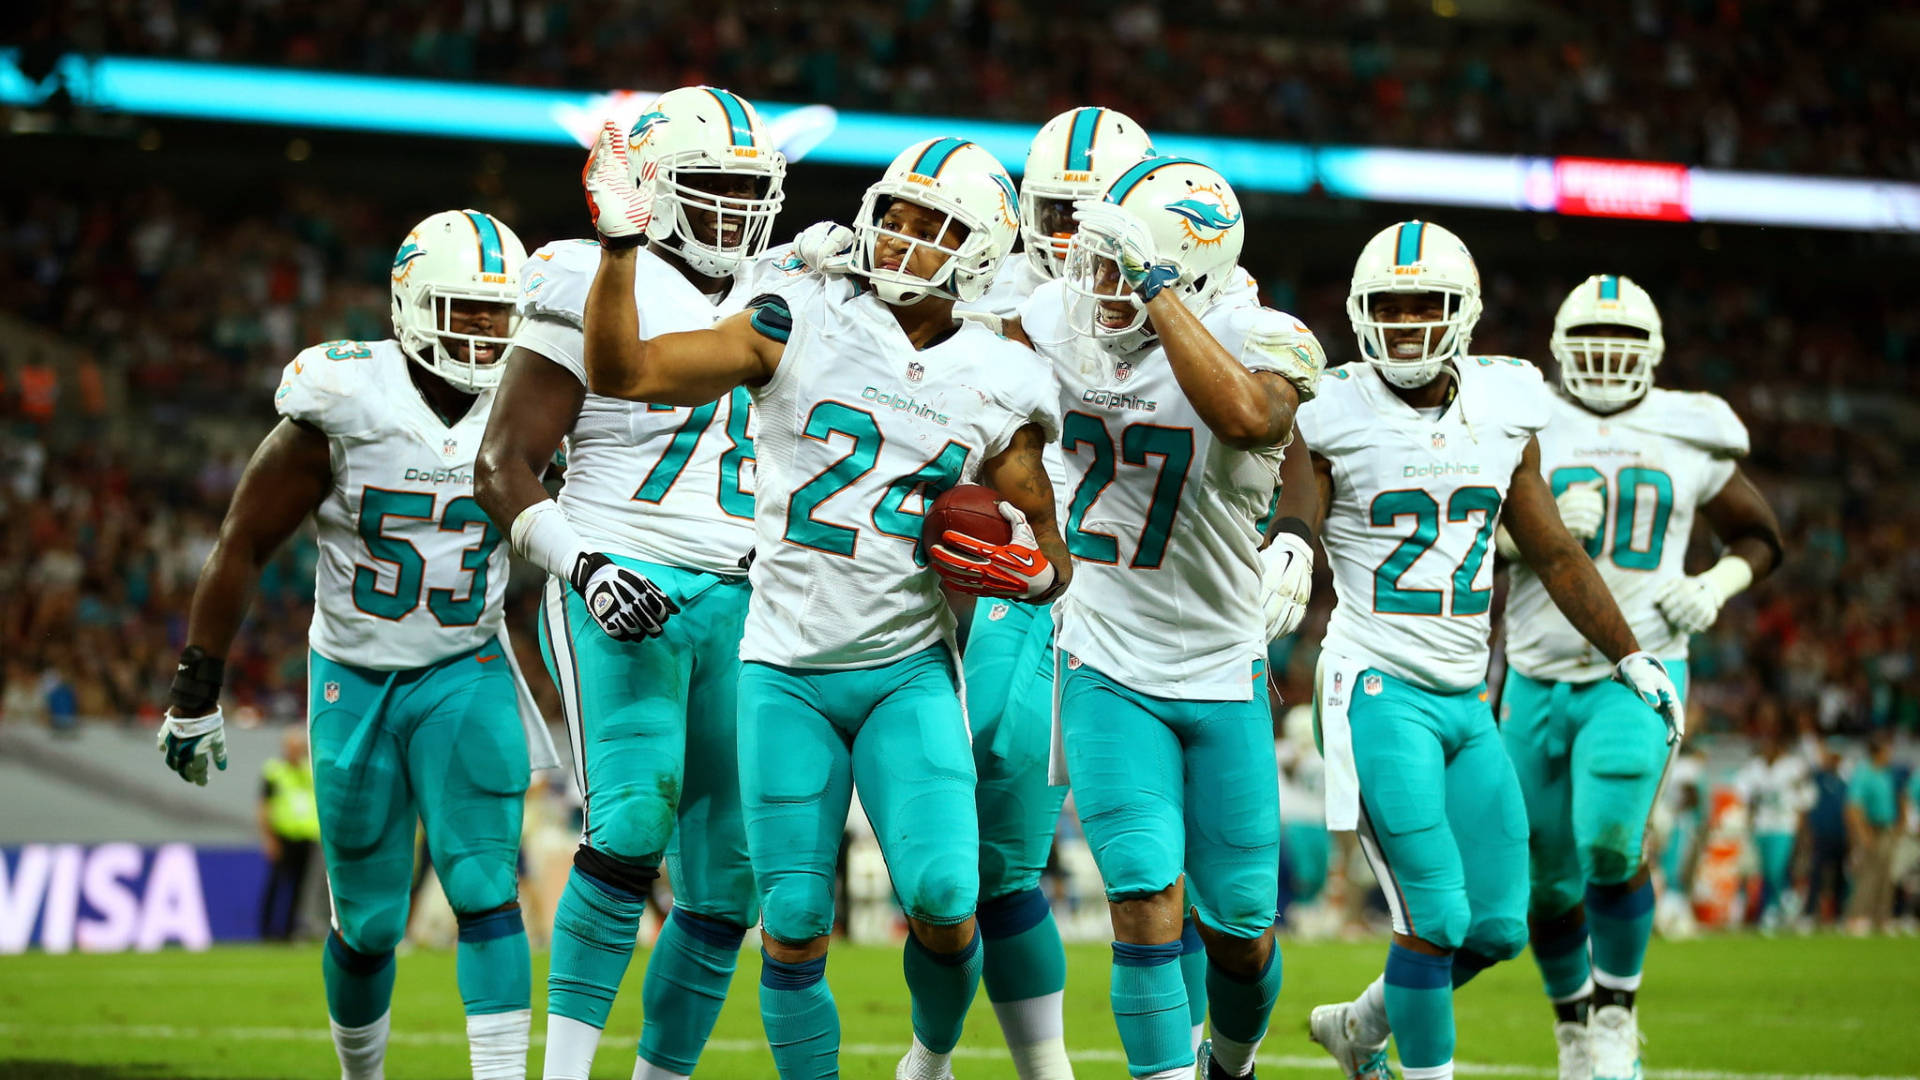 Miami Dolphins 1920X1080 Wallpaper and Background Image